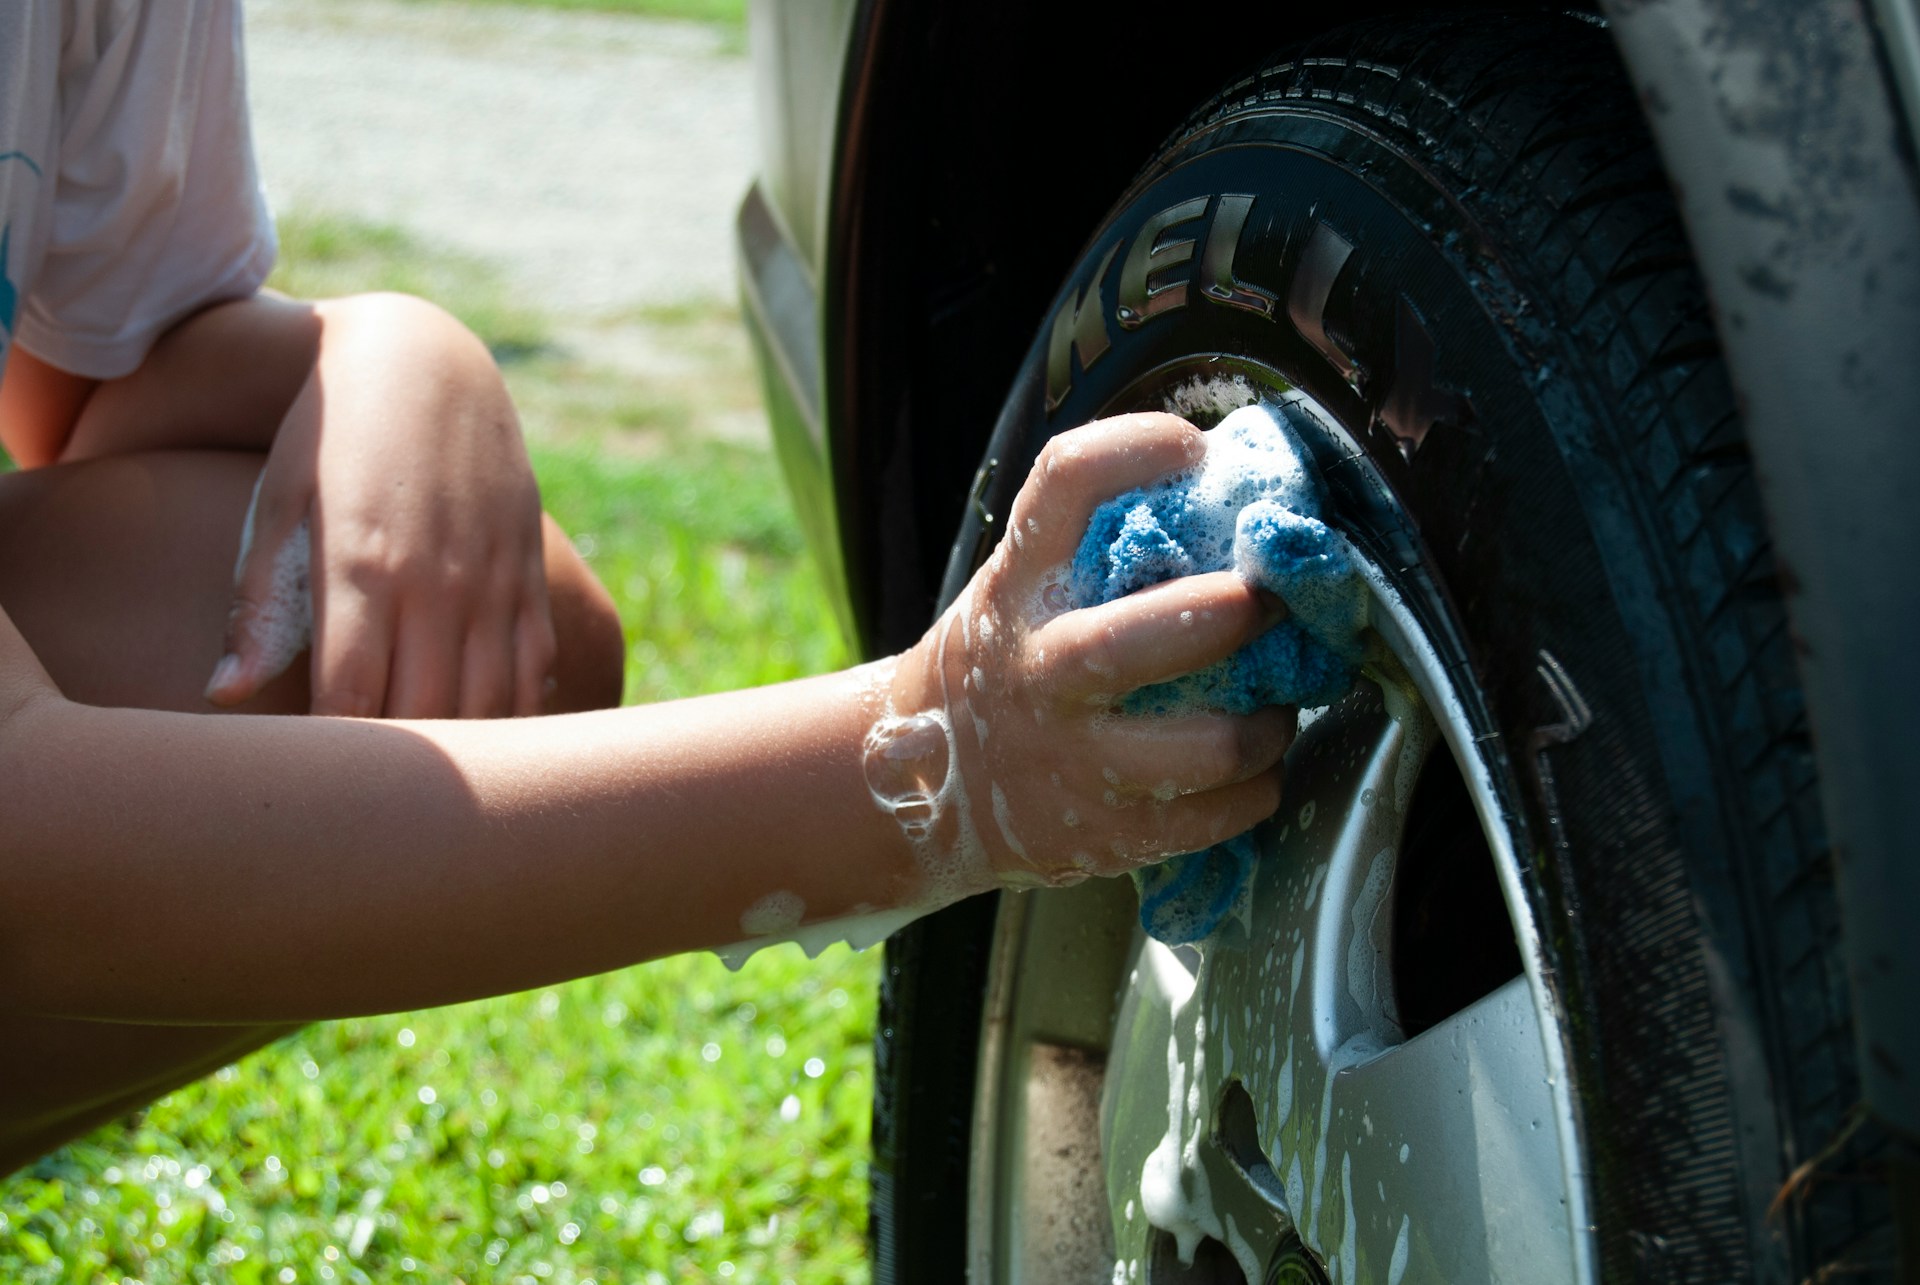 Why Hire an Auto Detailer over an At-Home Car Wash?